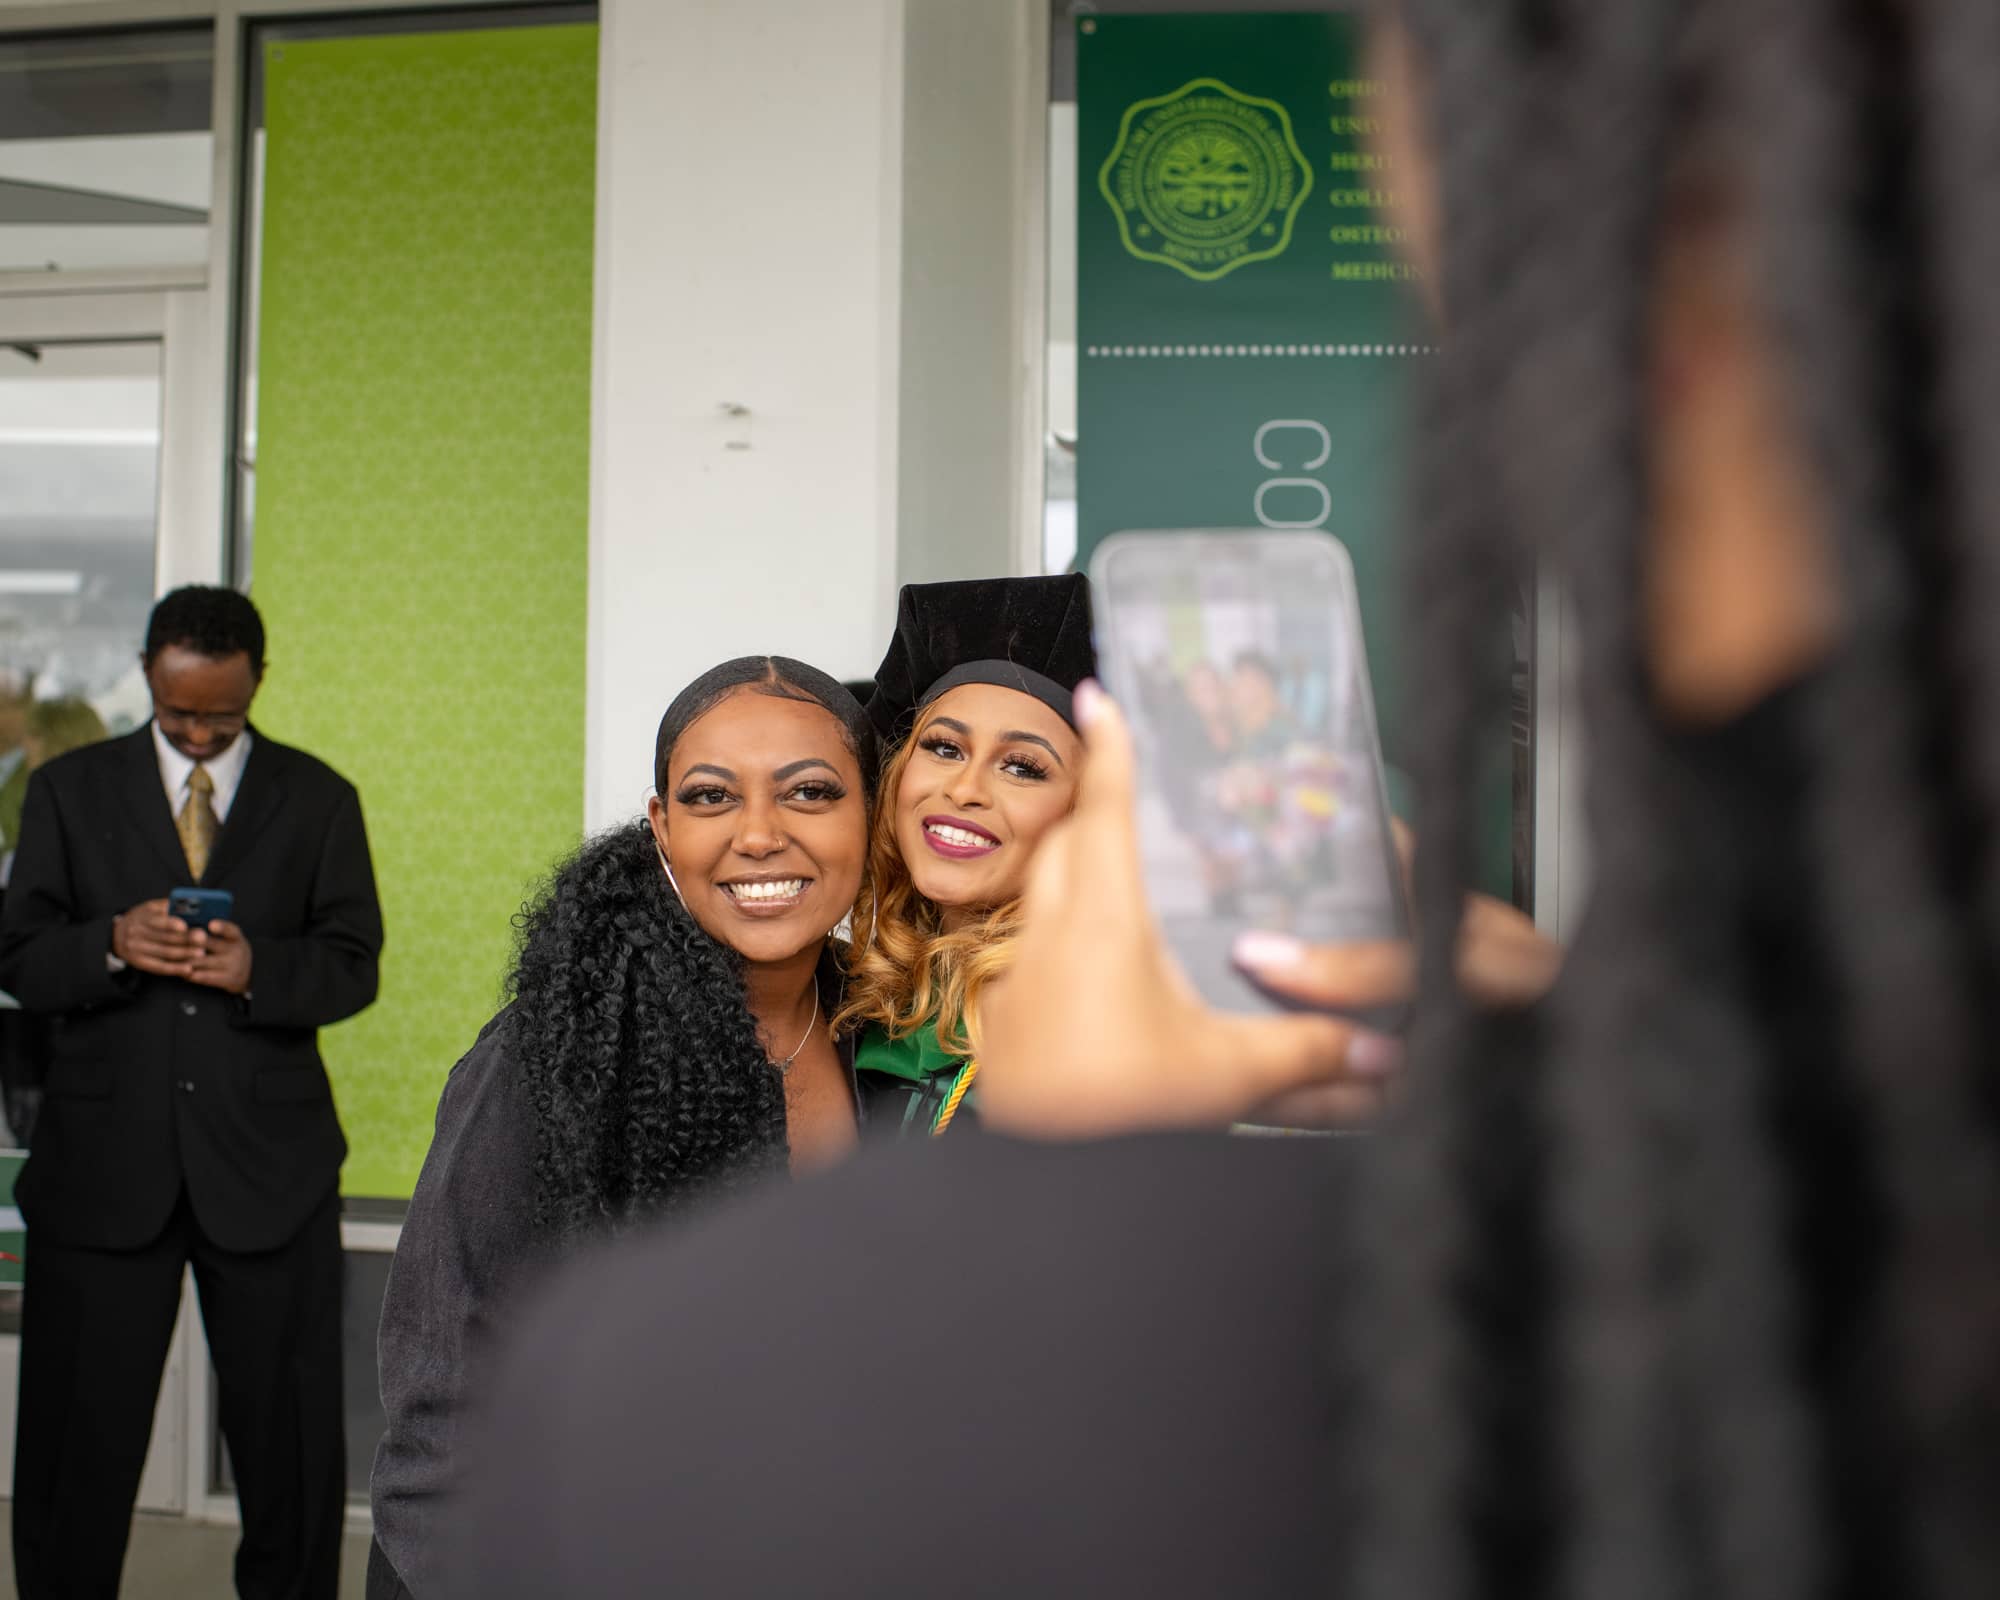 A Heritage College graduate poses for a photo with a supporter following commencement.